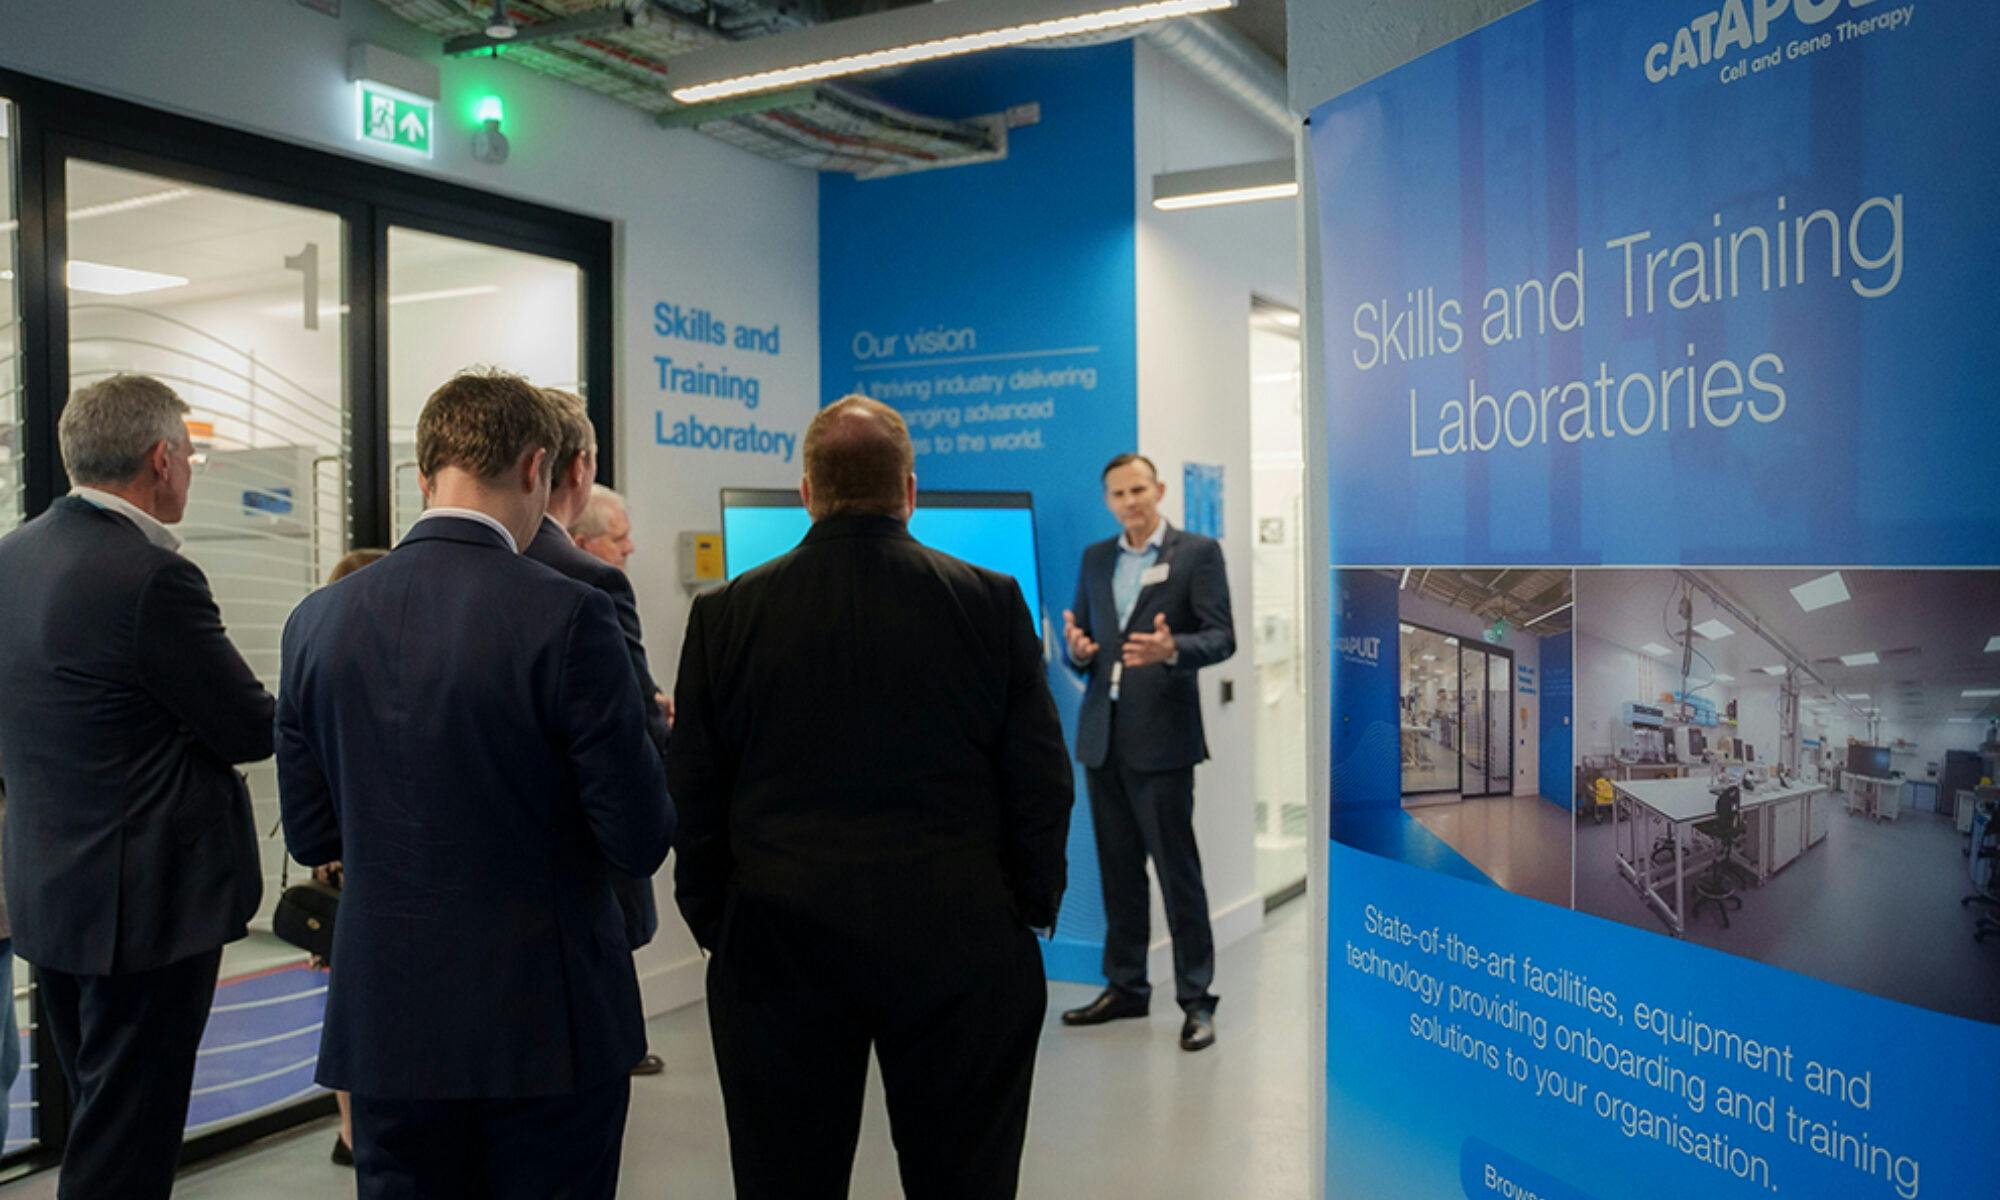 Cell and Gene Therapy Catapult’s new laboratories showcased at the opening of Sycamore House